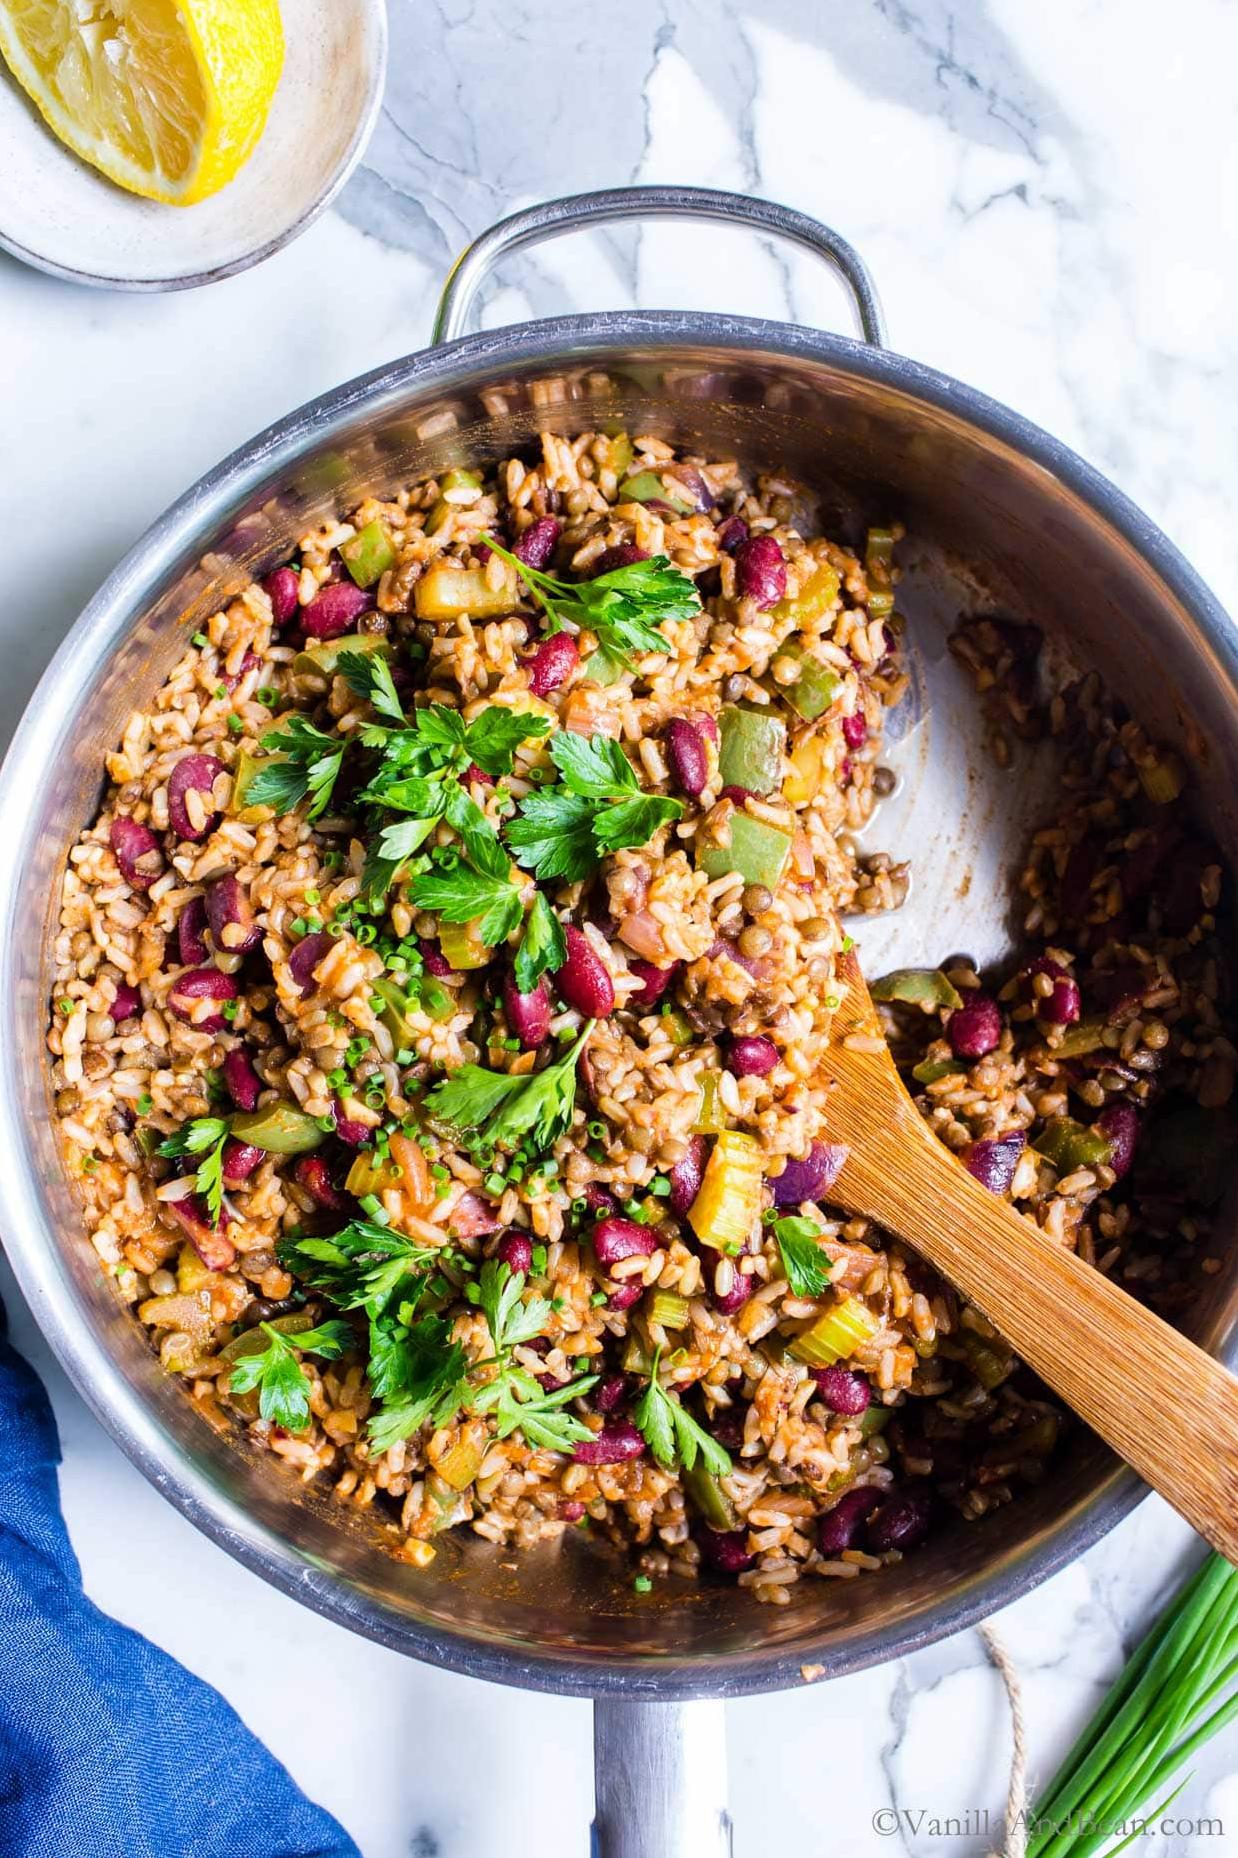  Our Vegetarian Dirty Rice is packed with flavor and will satisfy any cravings.